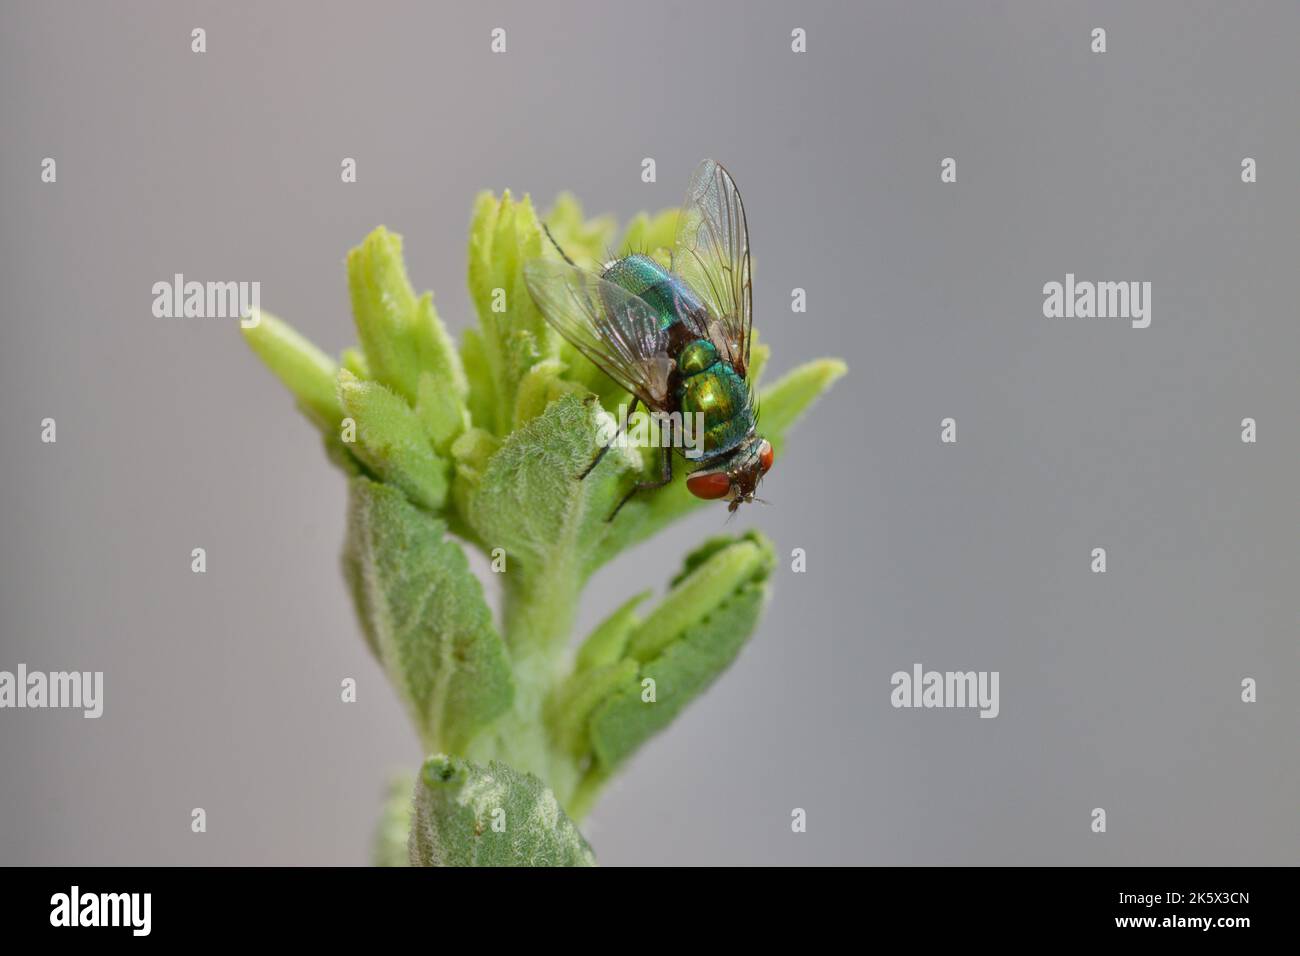 Close-up of a common bottle green fly (Phaenicia sericata or Lucilia sericata) on the stem of a rebaudian stevia with neutral gray background Stock Photo